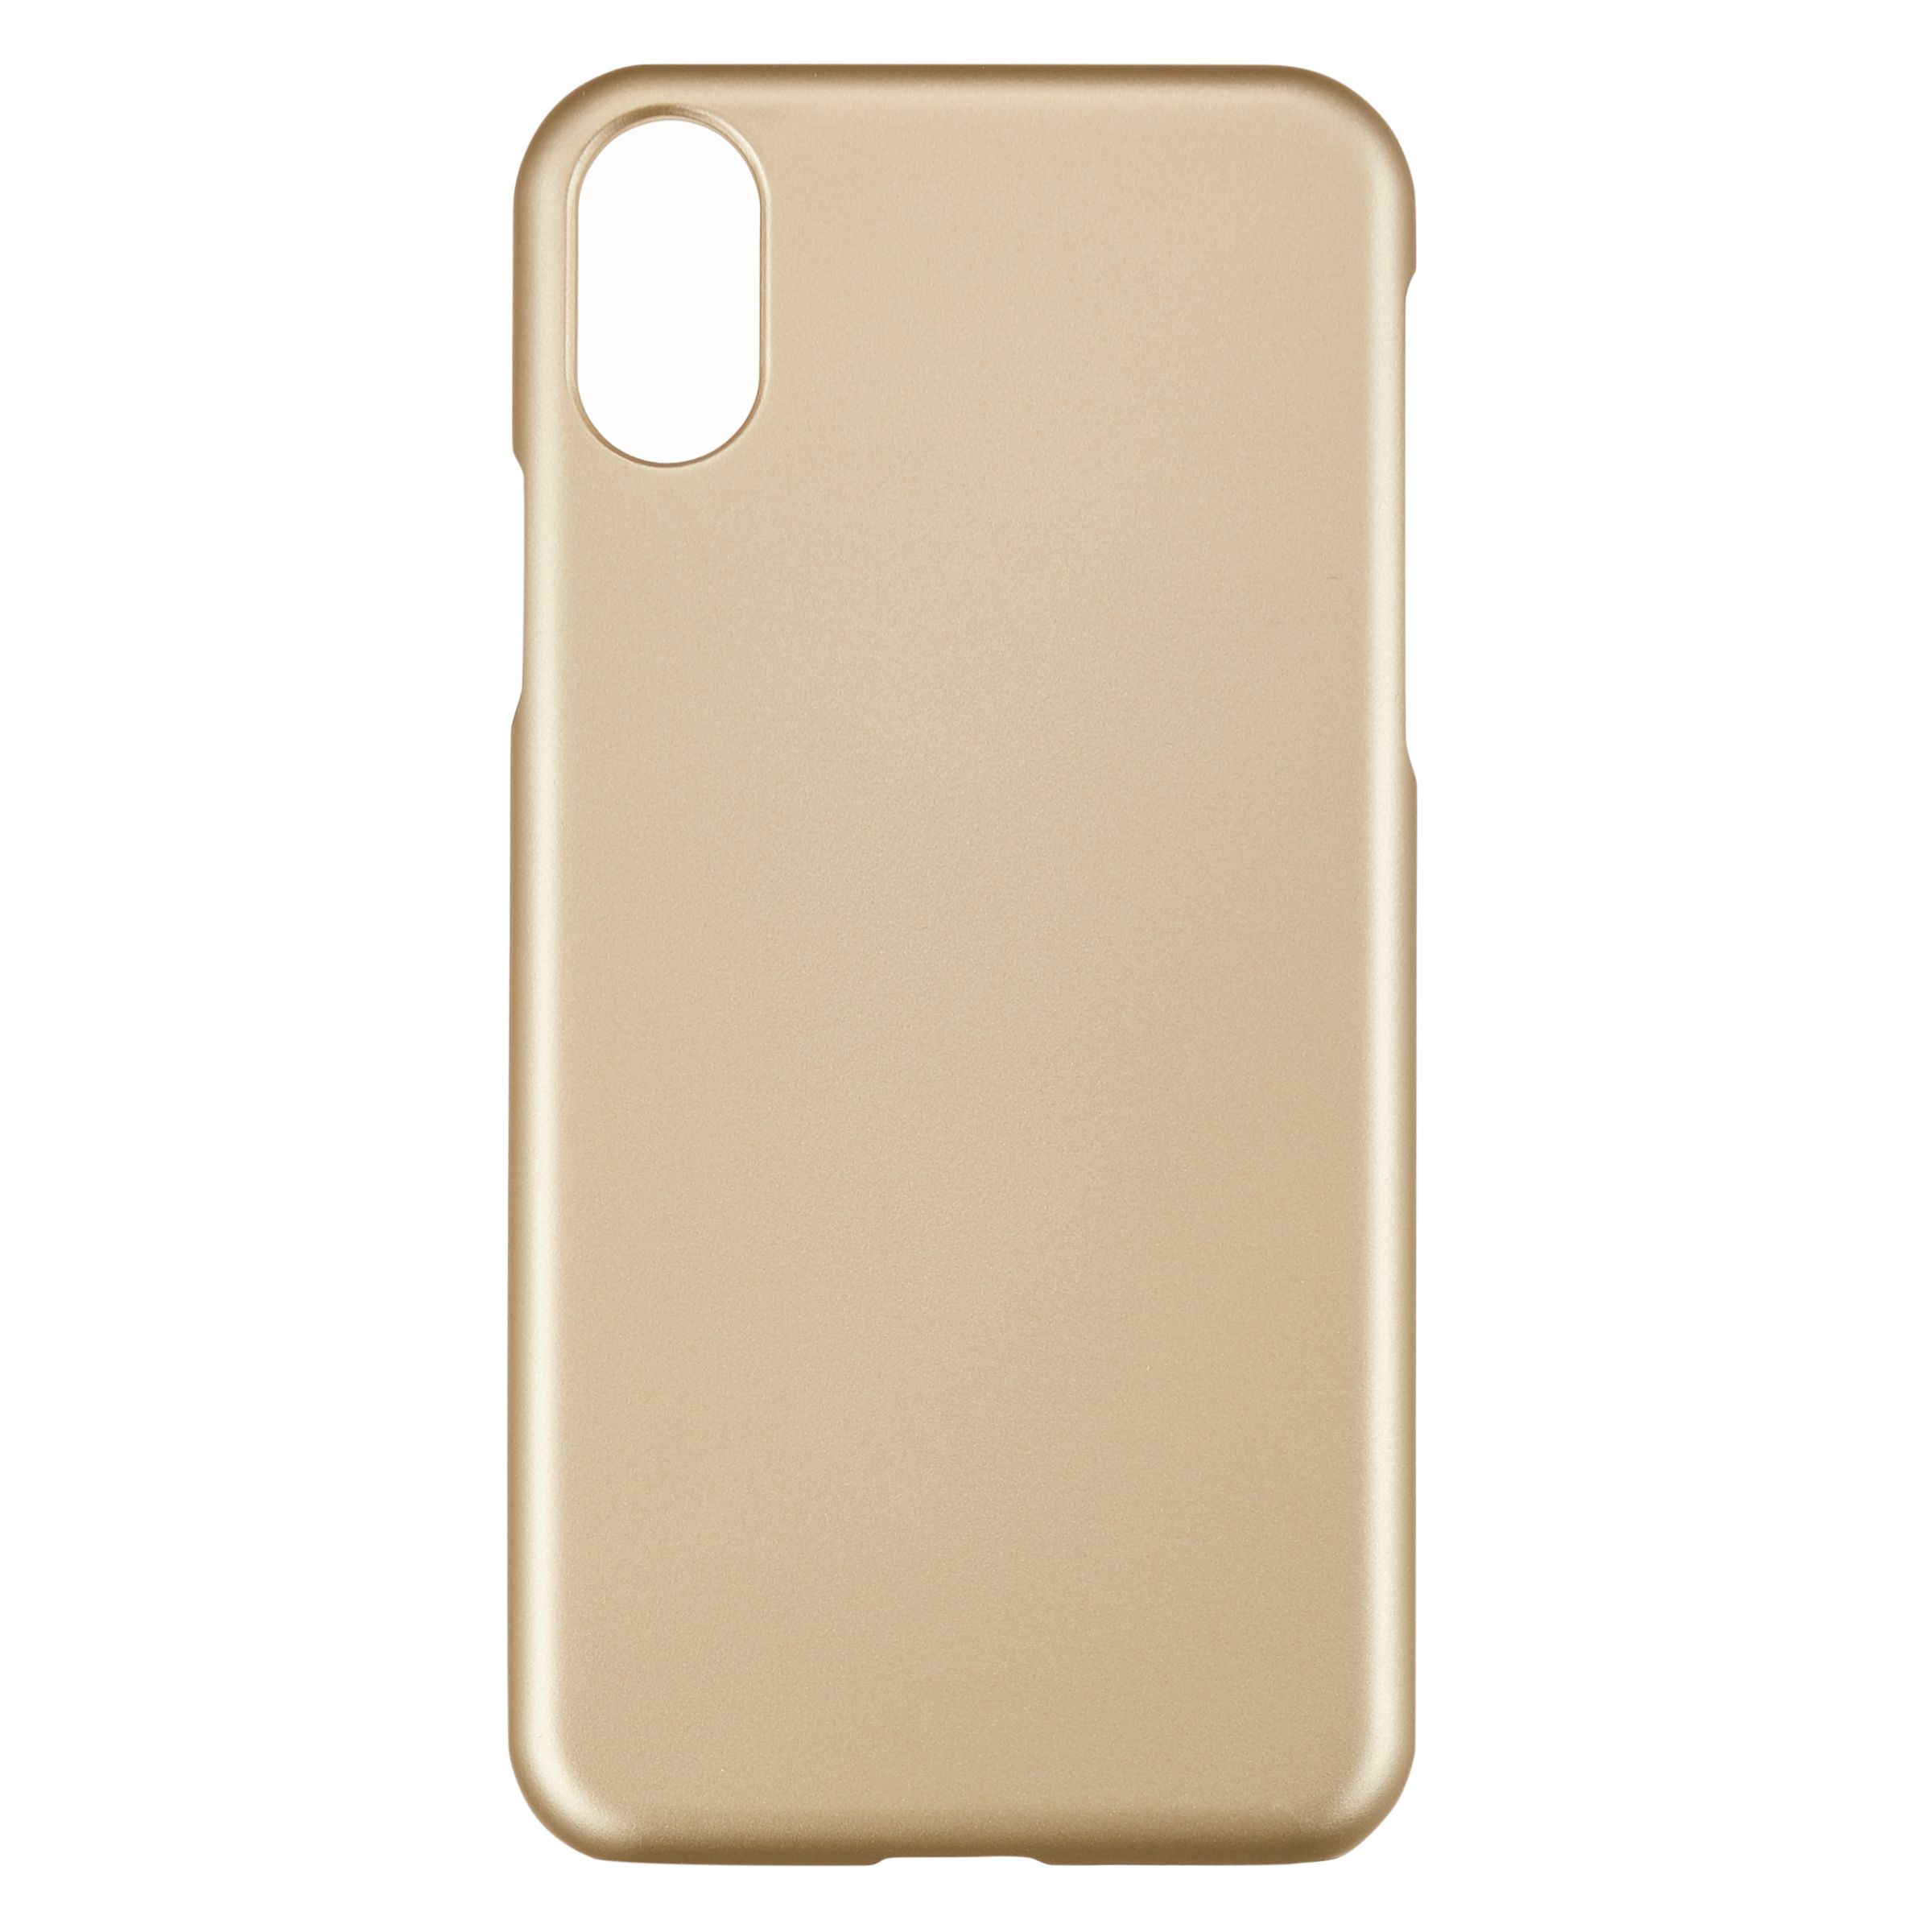 John Lewis & Partners Case for iPhone X